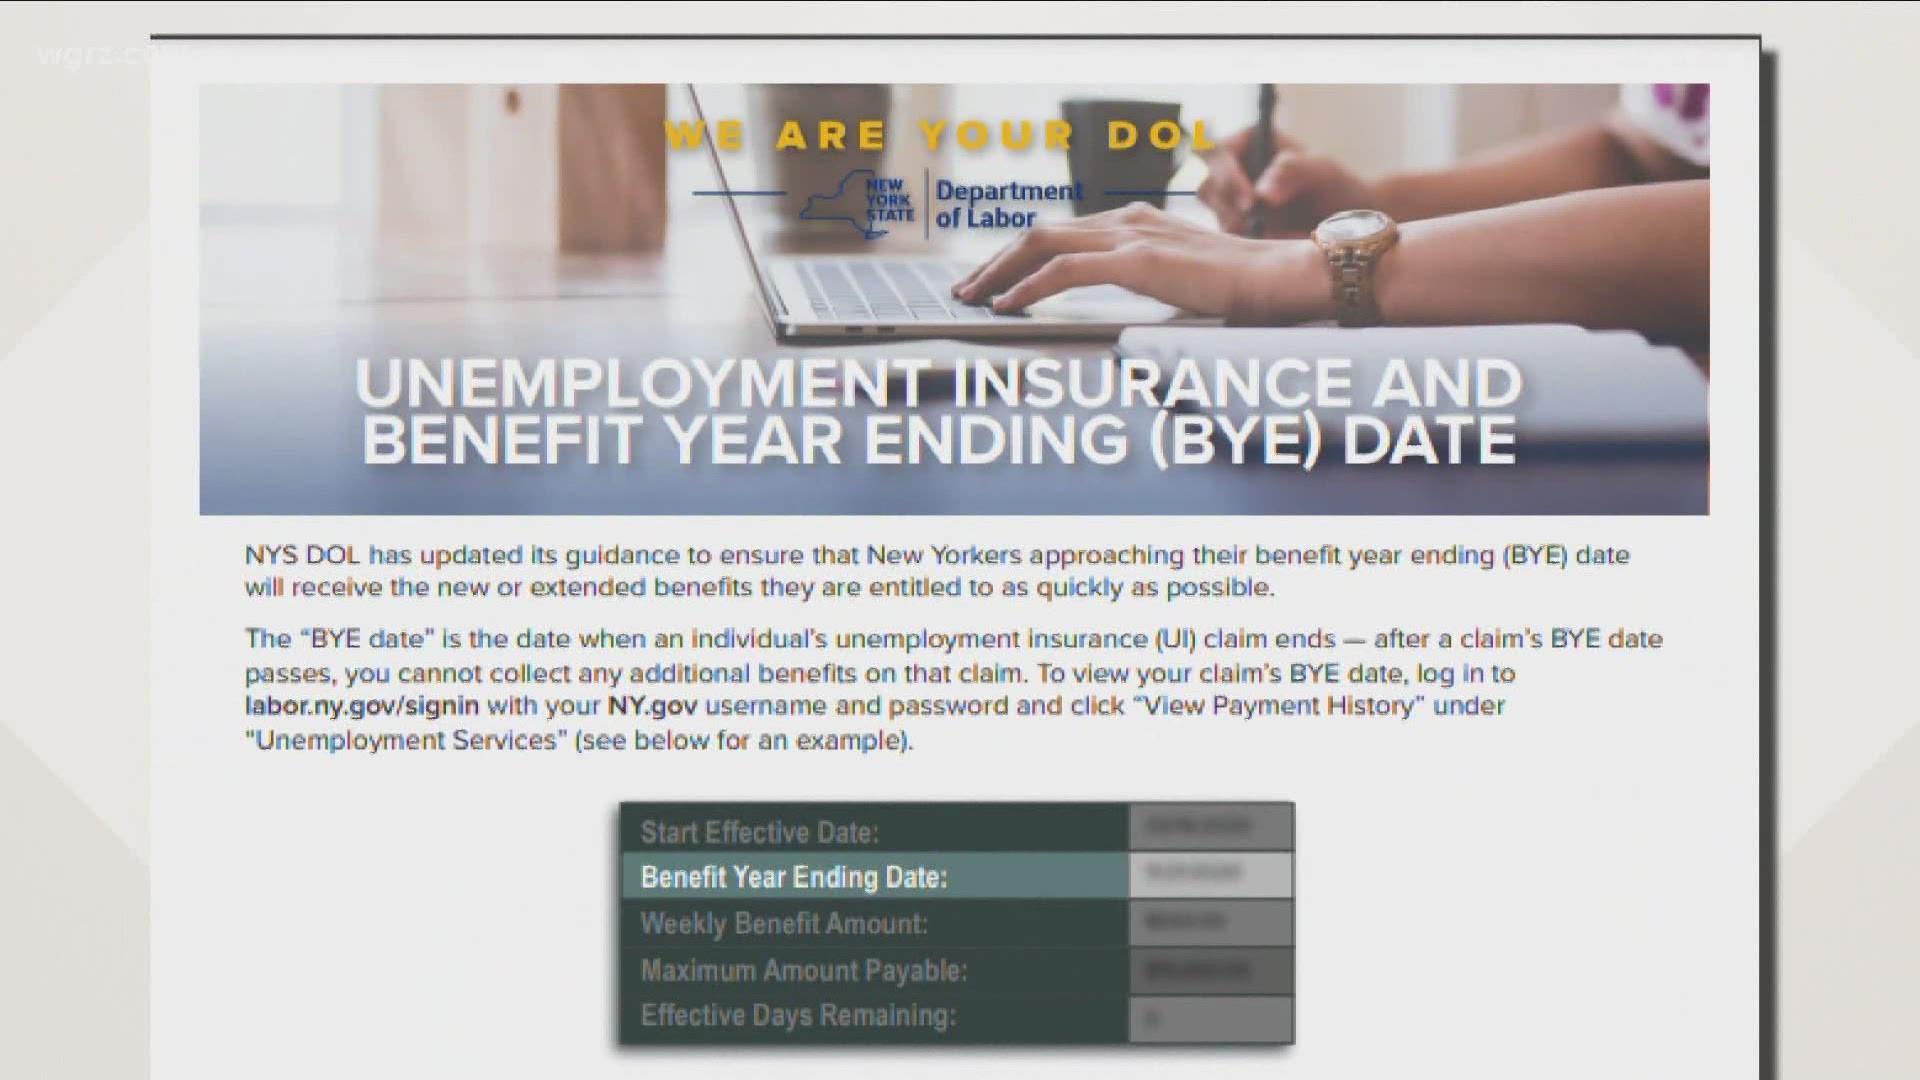 Hundreds of people have emailed 2 On Your Side this week, saying they haven't received their unemployment benefits or their $300 weekly federal boost.